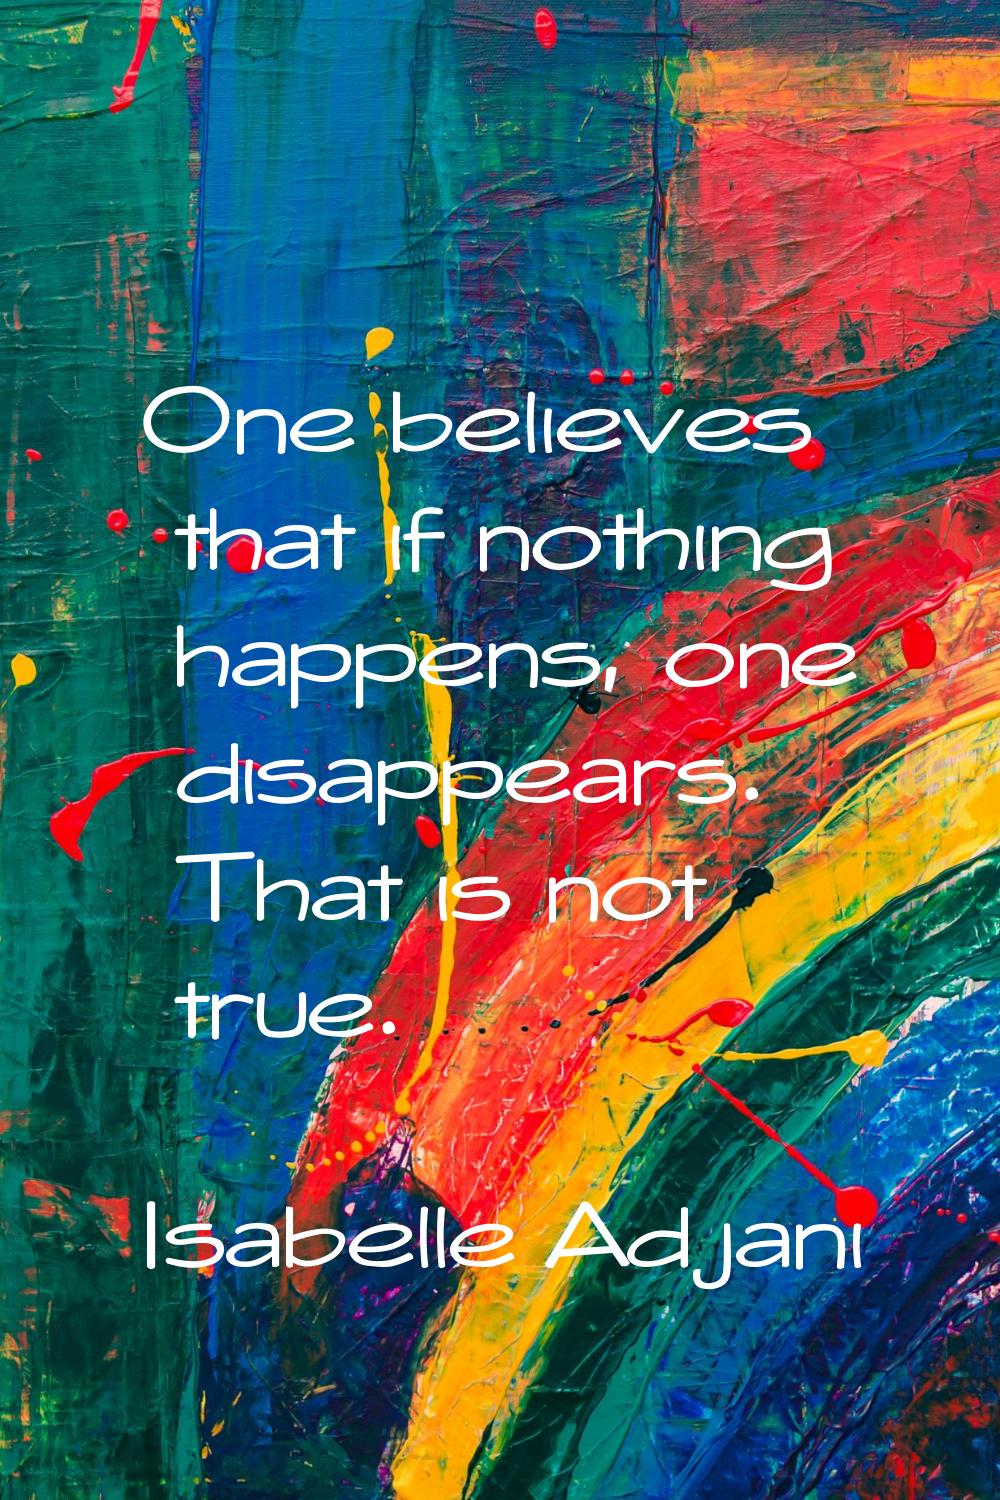 One believes that if nothing happens, one disappears. That is not true.